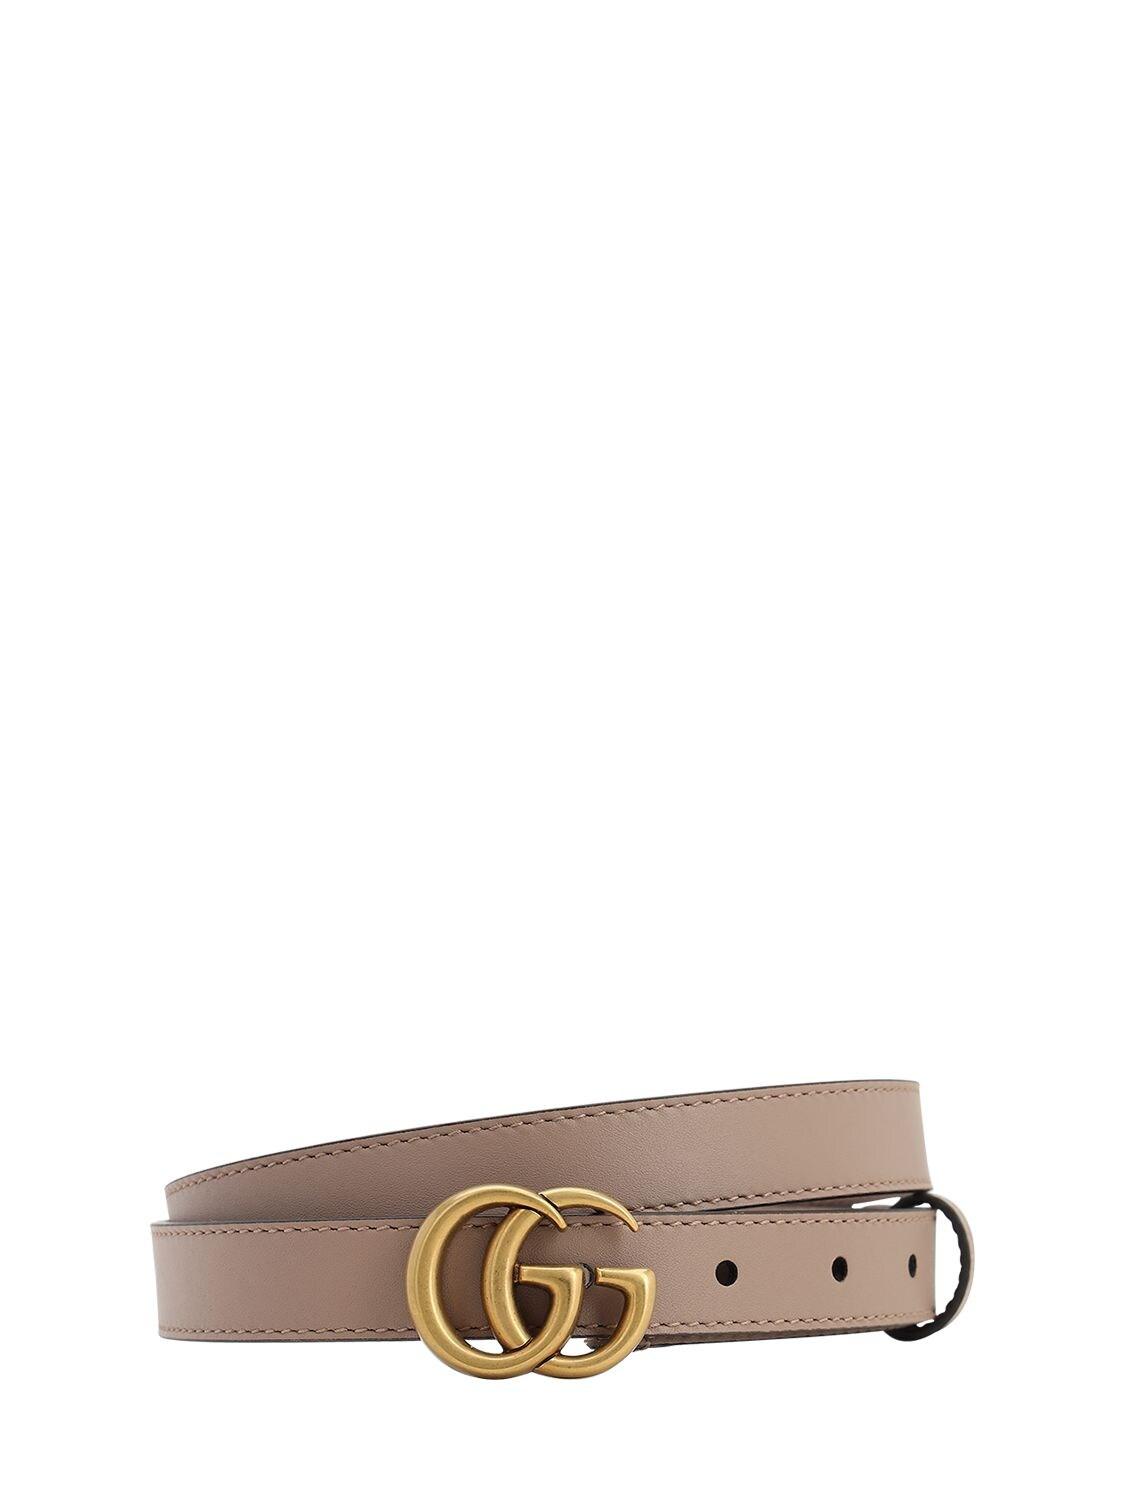 Gucci 2cm Gg Marmont Leather Belt in Pink - Save 6% | Lyst